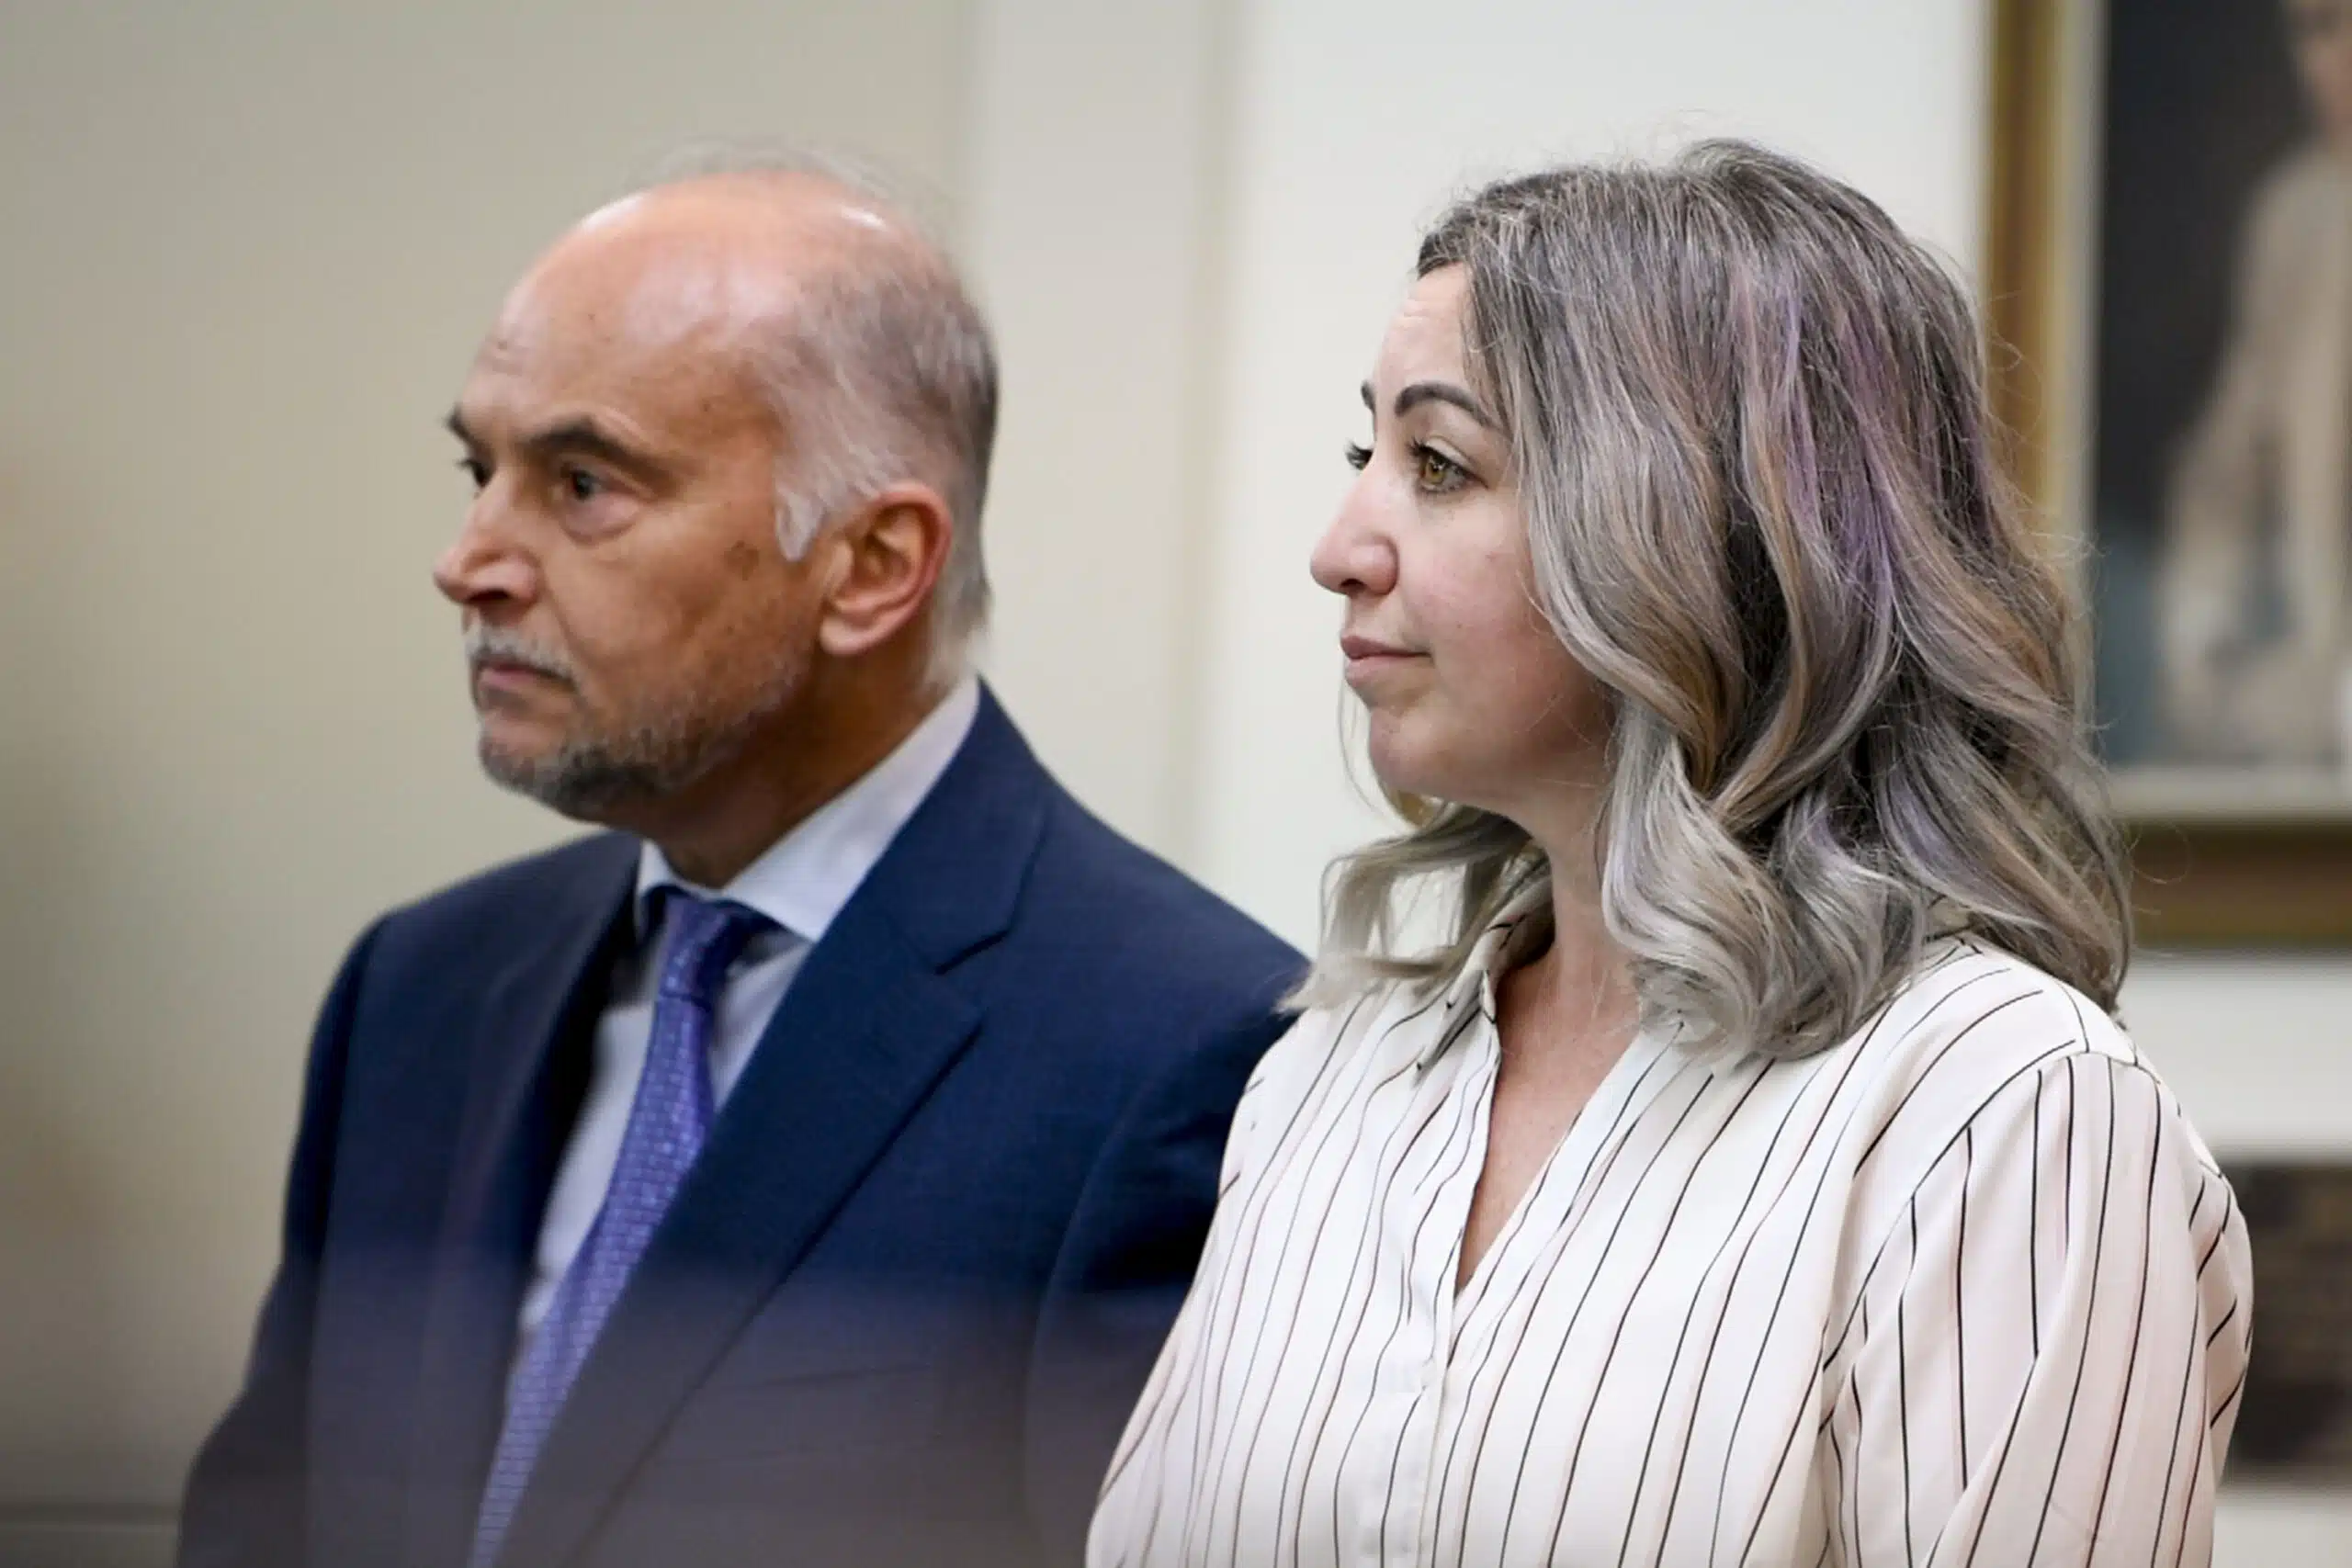 RaDonda Vaught and her attorney Peter Strianse listen as verdicts are read at the end of her trial in Nashville on March 25, 2022.